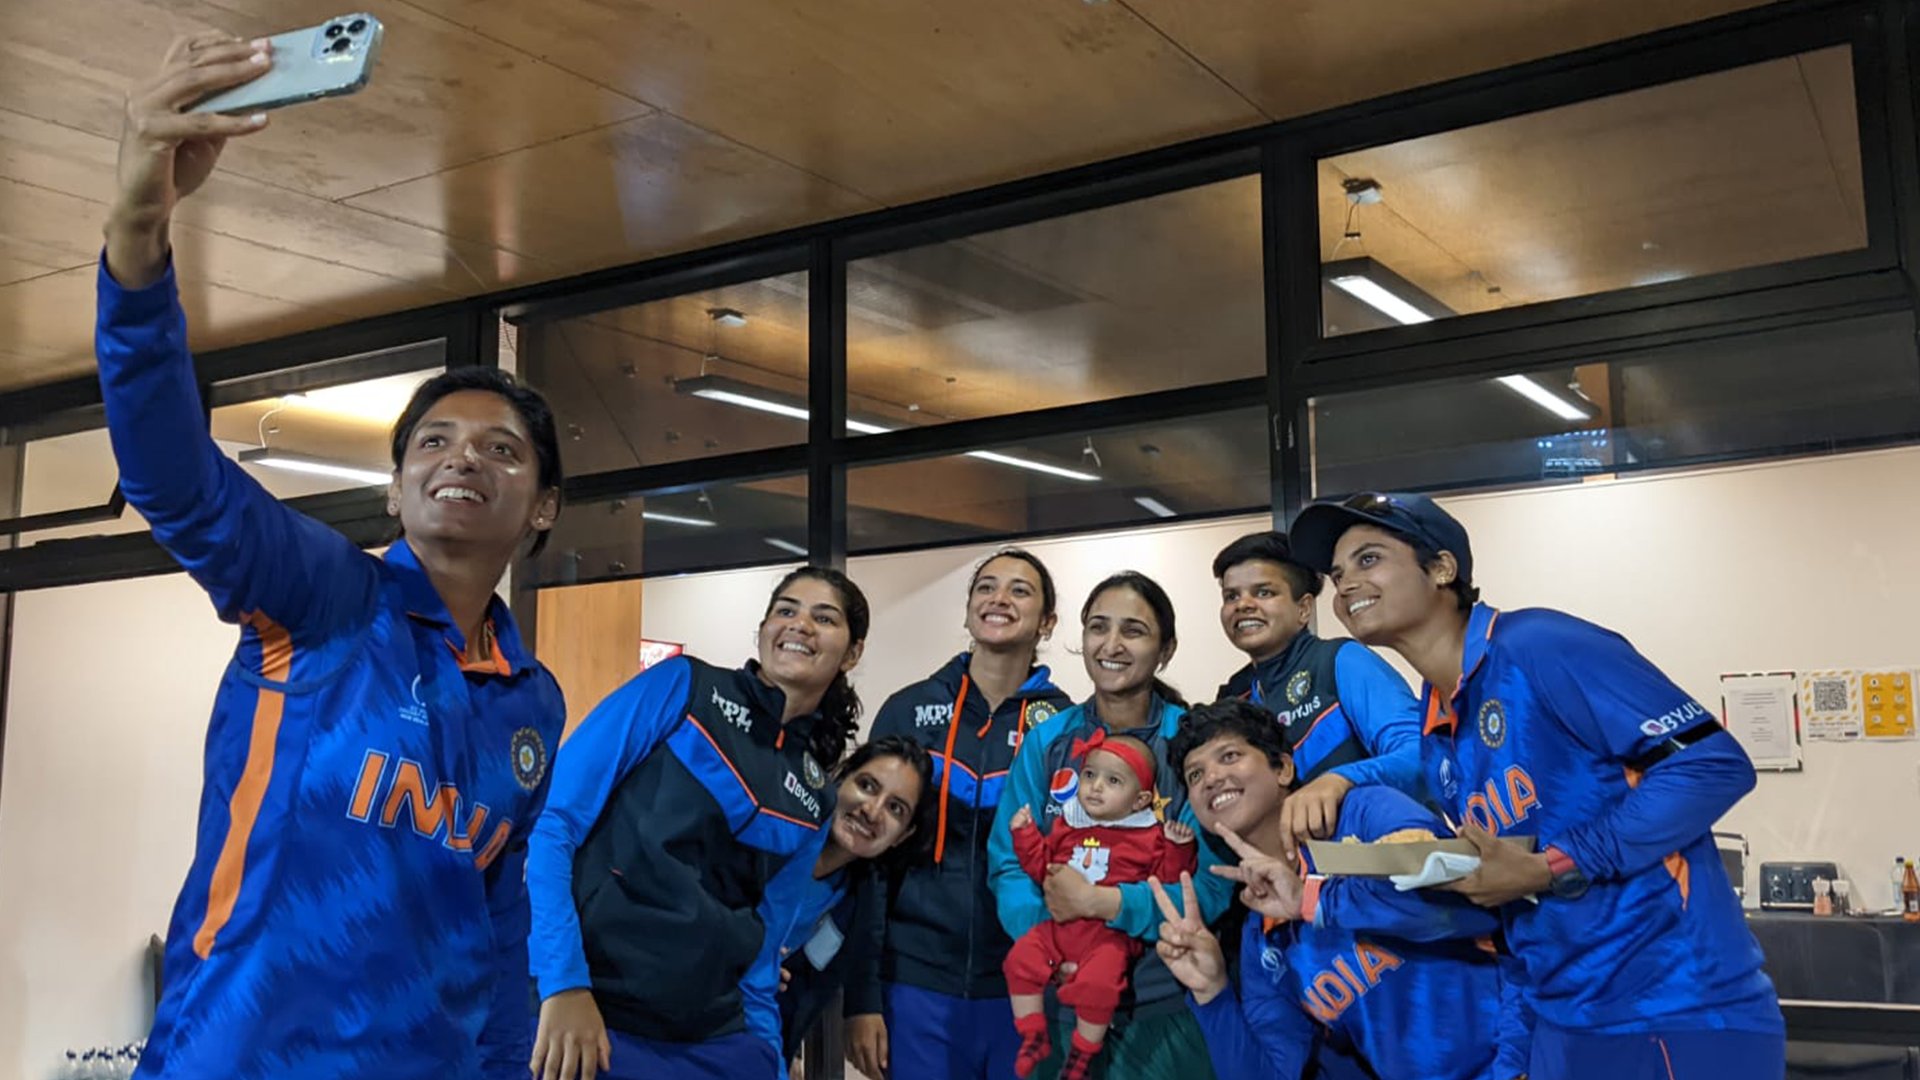 Bismah Maroof's daughter Fatima with Indian cricketers after the ICC Women's World Cup match.